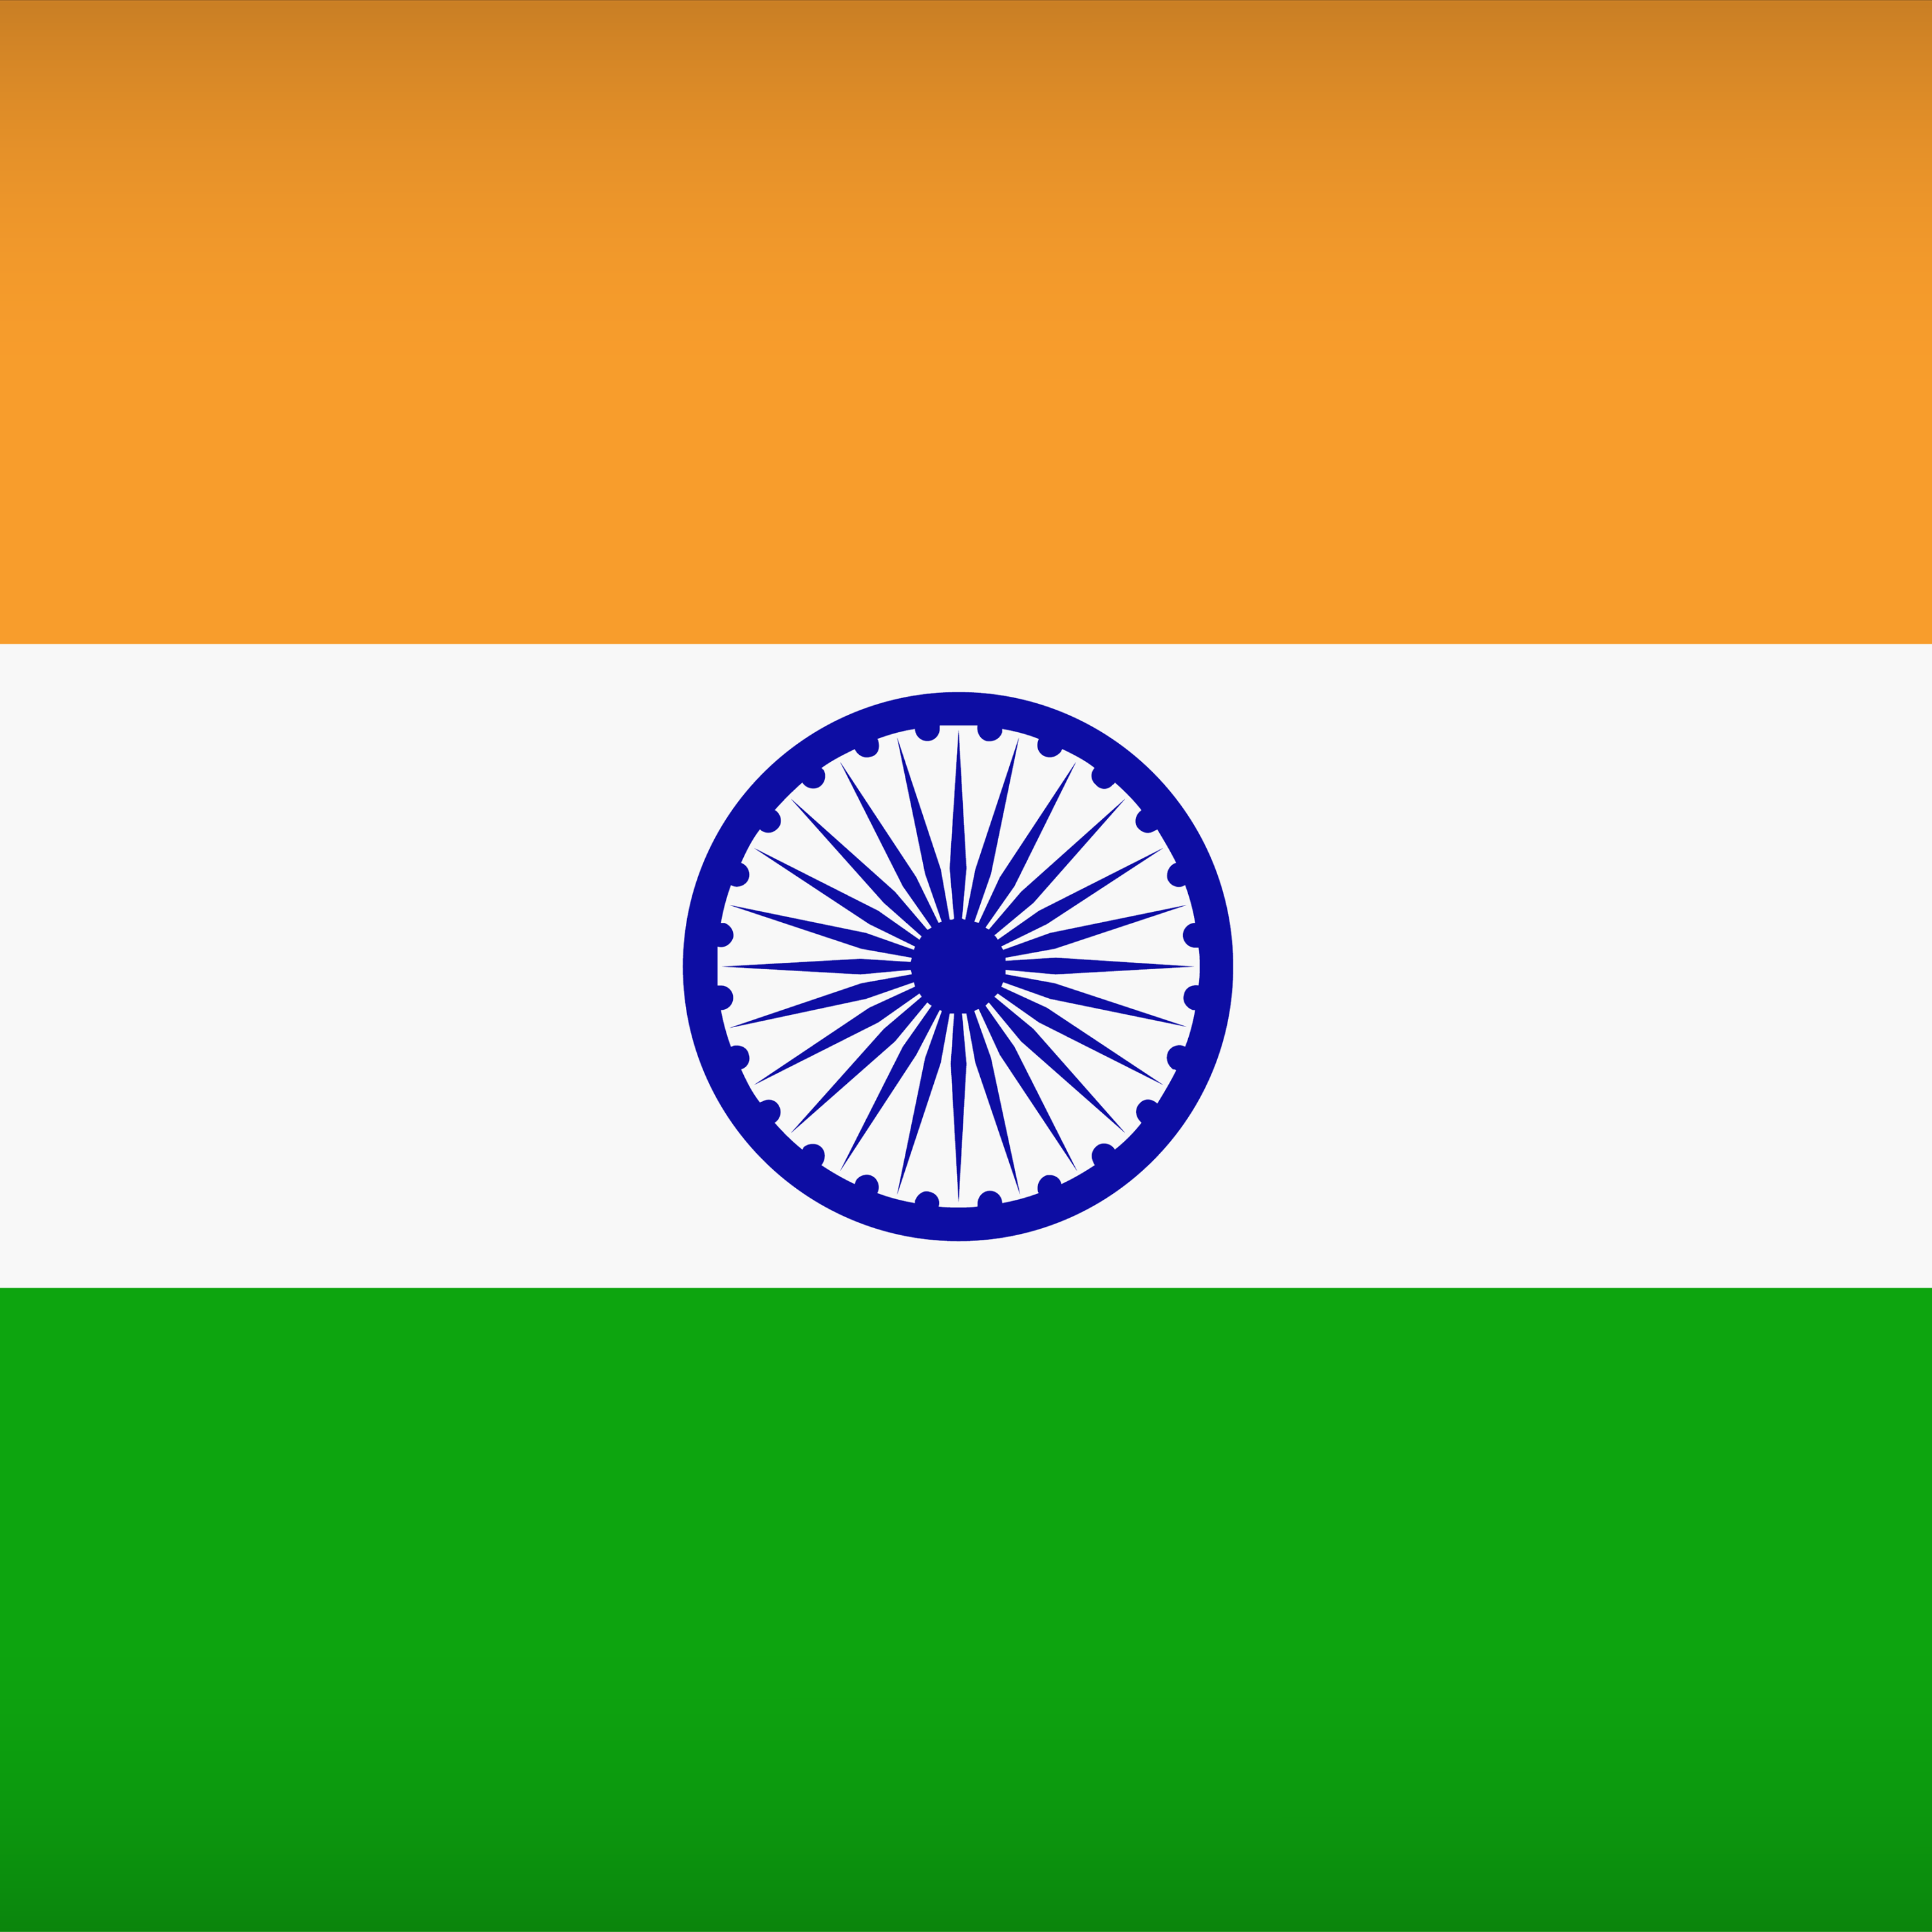 The National Flag of India by Paul Brennan